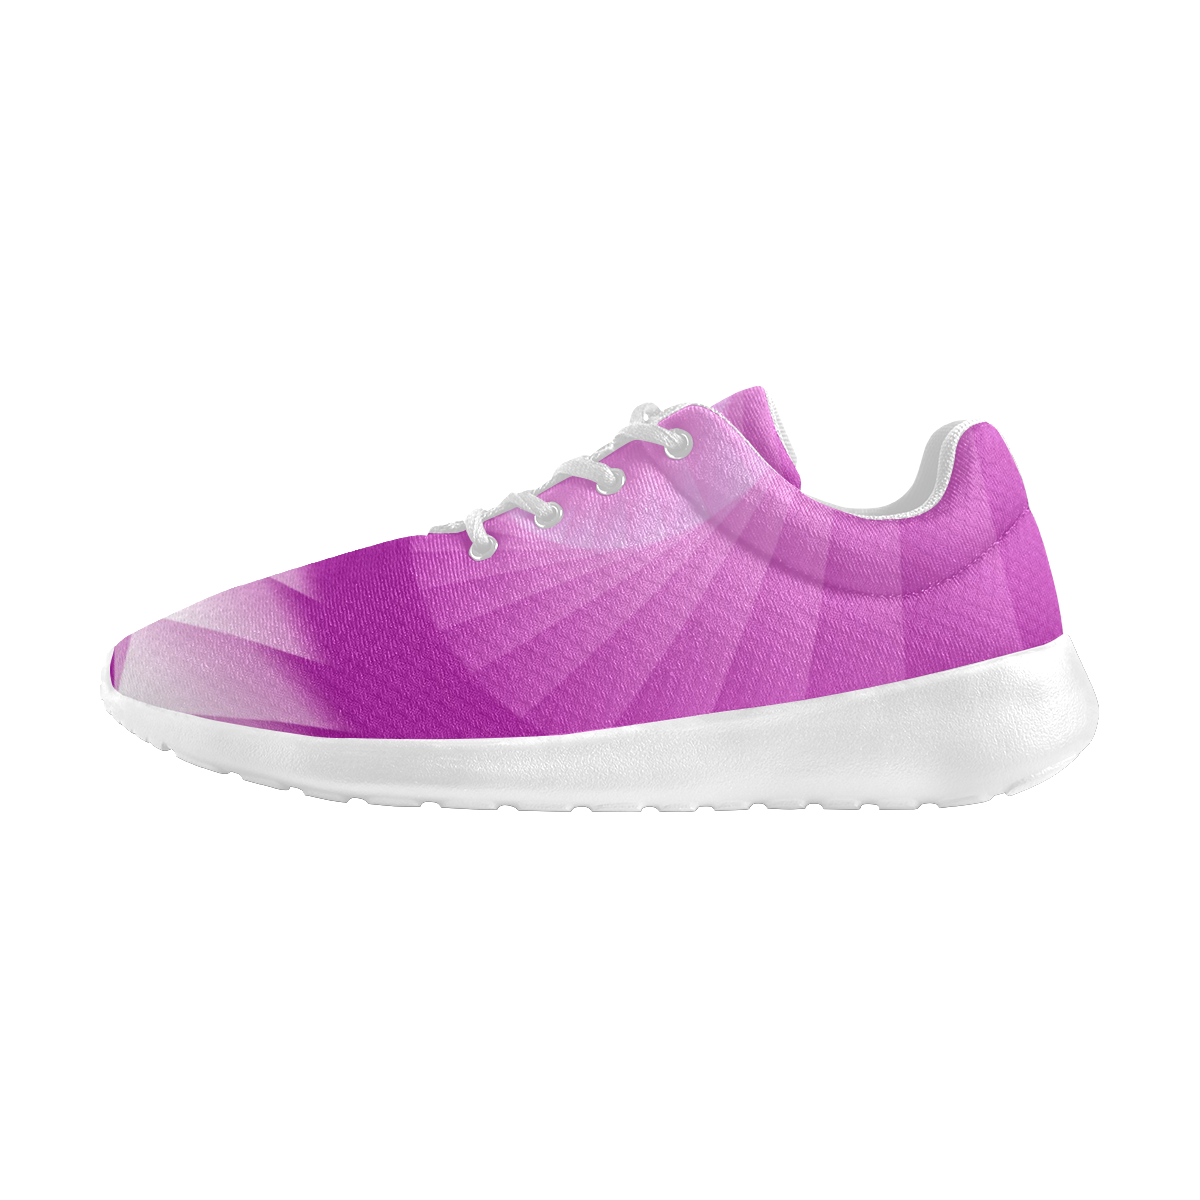 spiral-2477996 Women's Athletic Shoes (Model 0200)